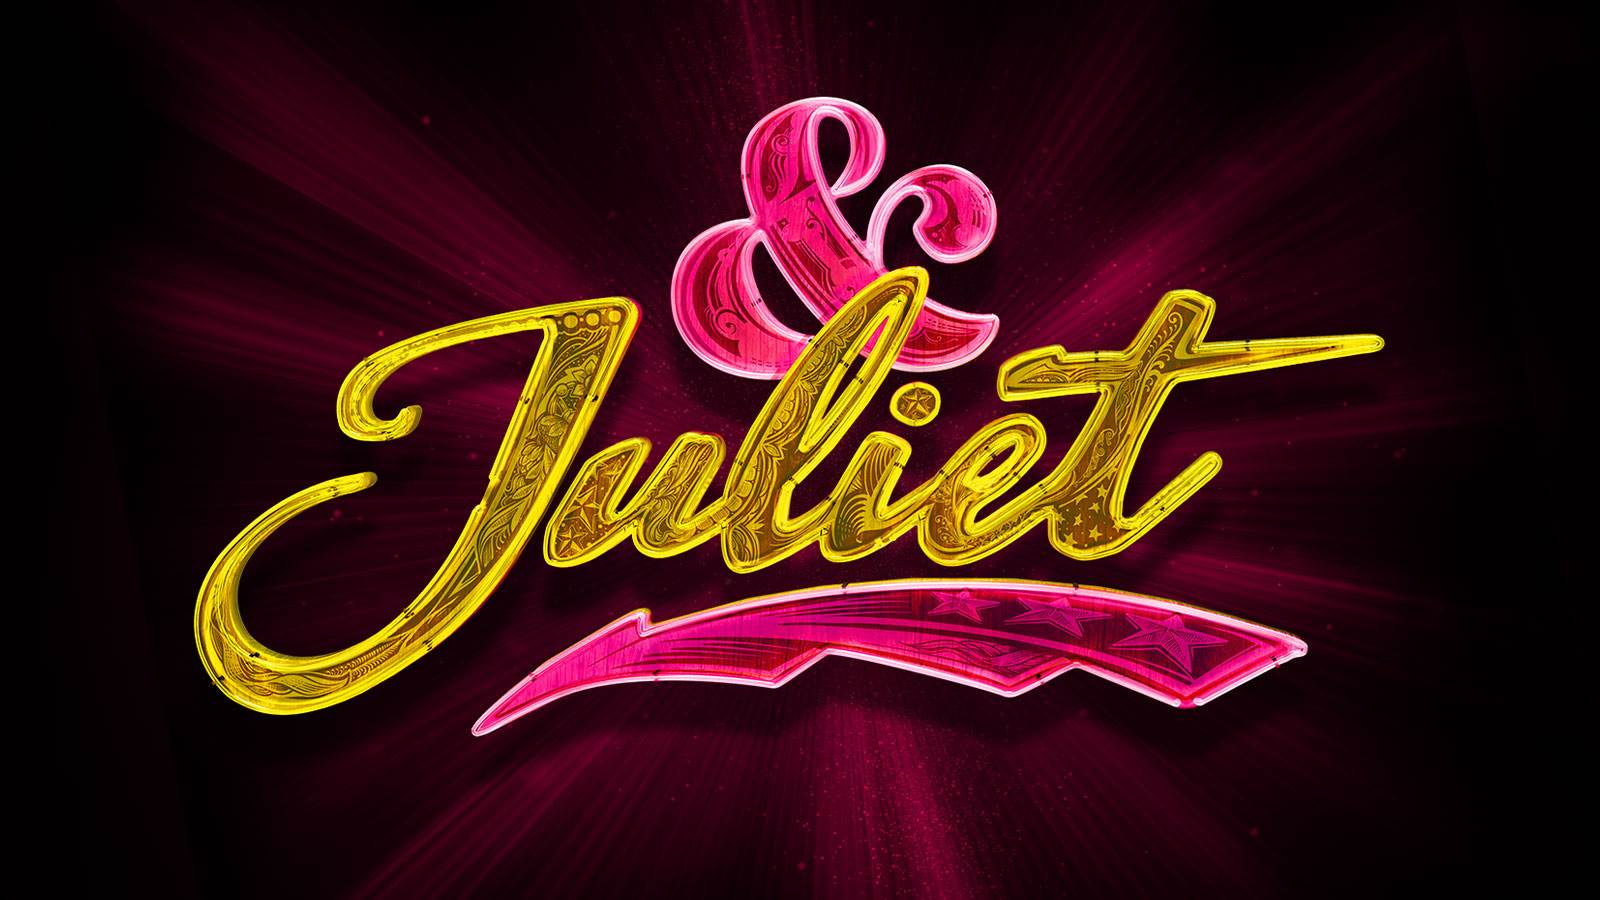 A neon sign on a black backdrop with a pink glow burst. The sign reads "& Juliet". & is pink and Juliet is yellow. 